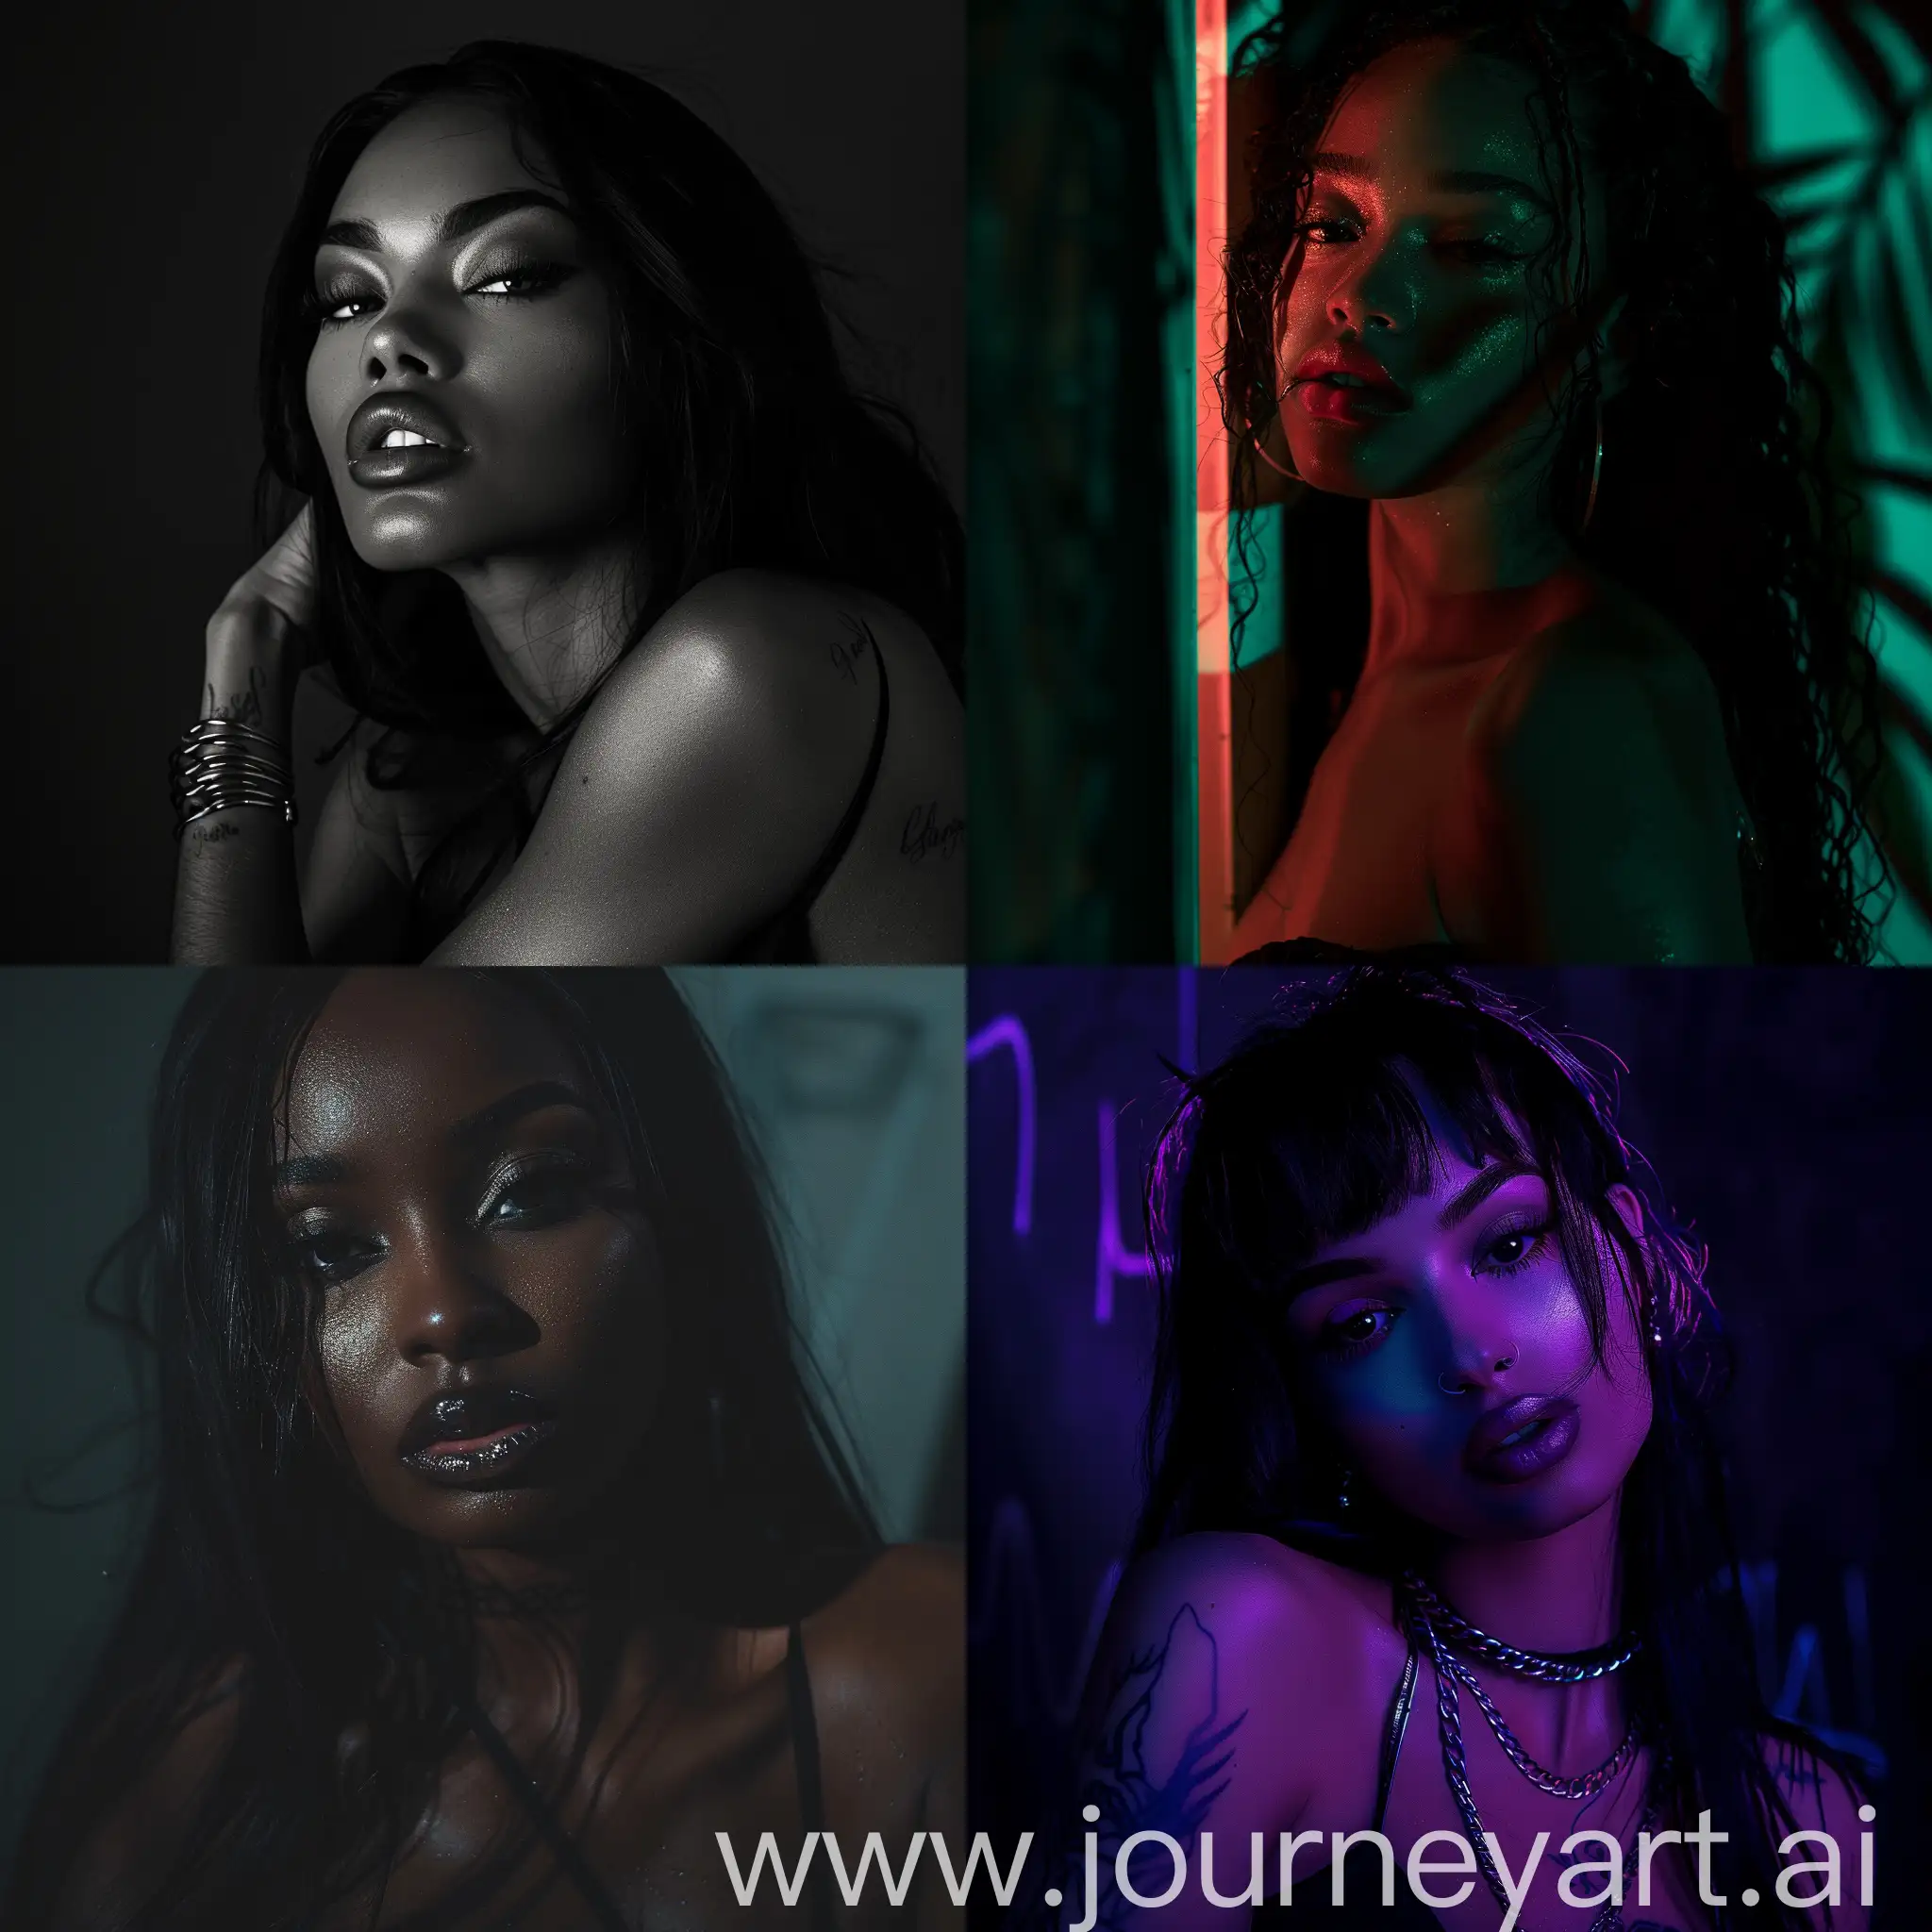 Mysterious-and-Sensual-RnB-Portrait-in-Dark-Ambiance